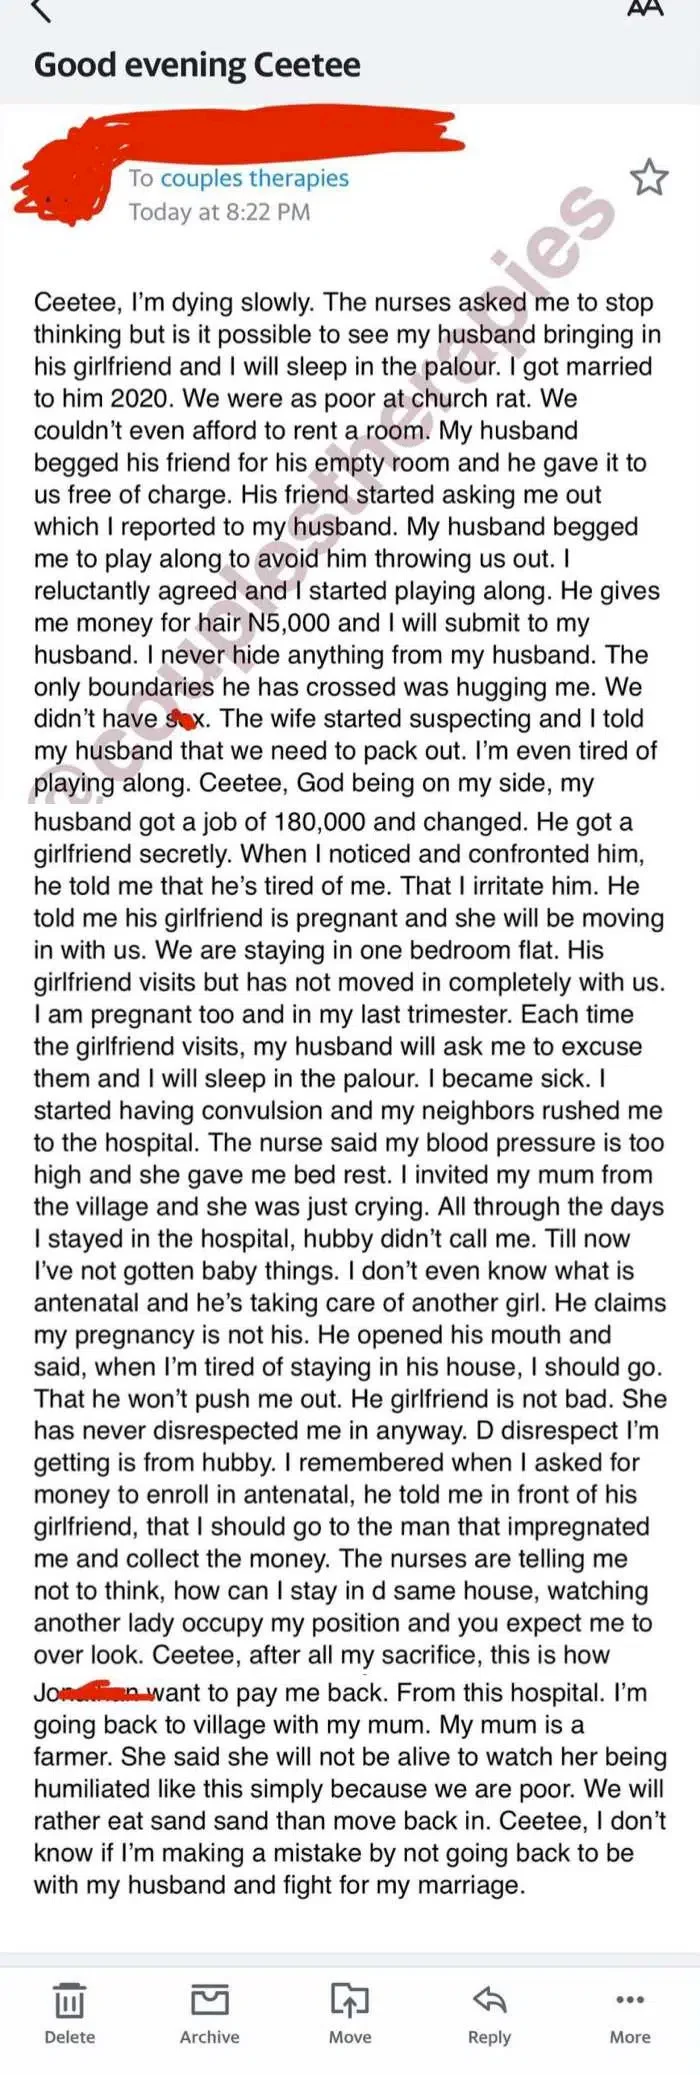 Pregnant wife seeks advice to save marriage as pregnant side chic moves into their one bedroom apartment